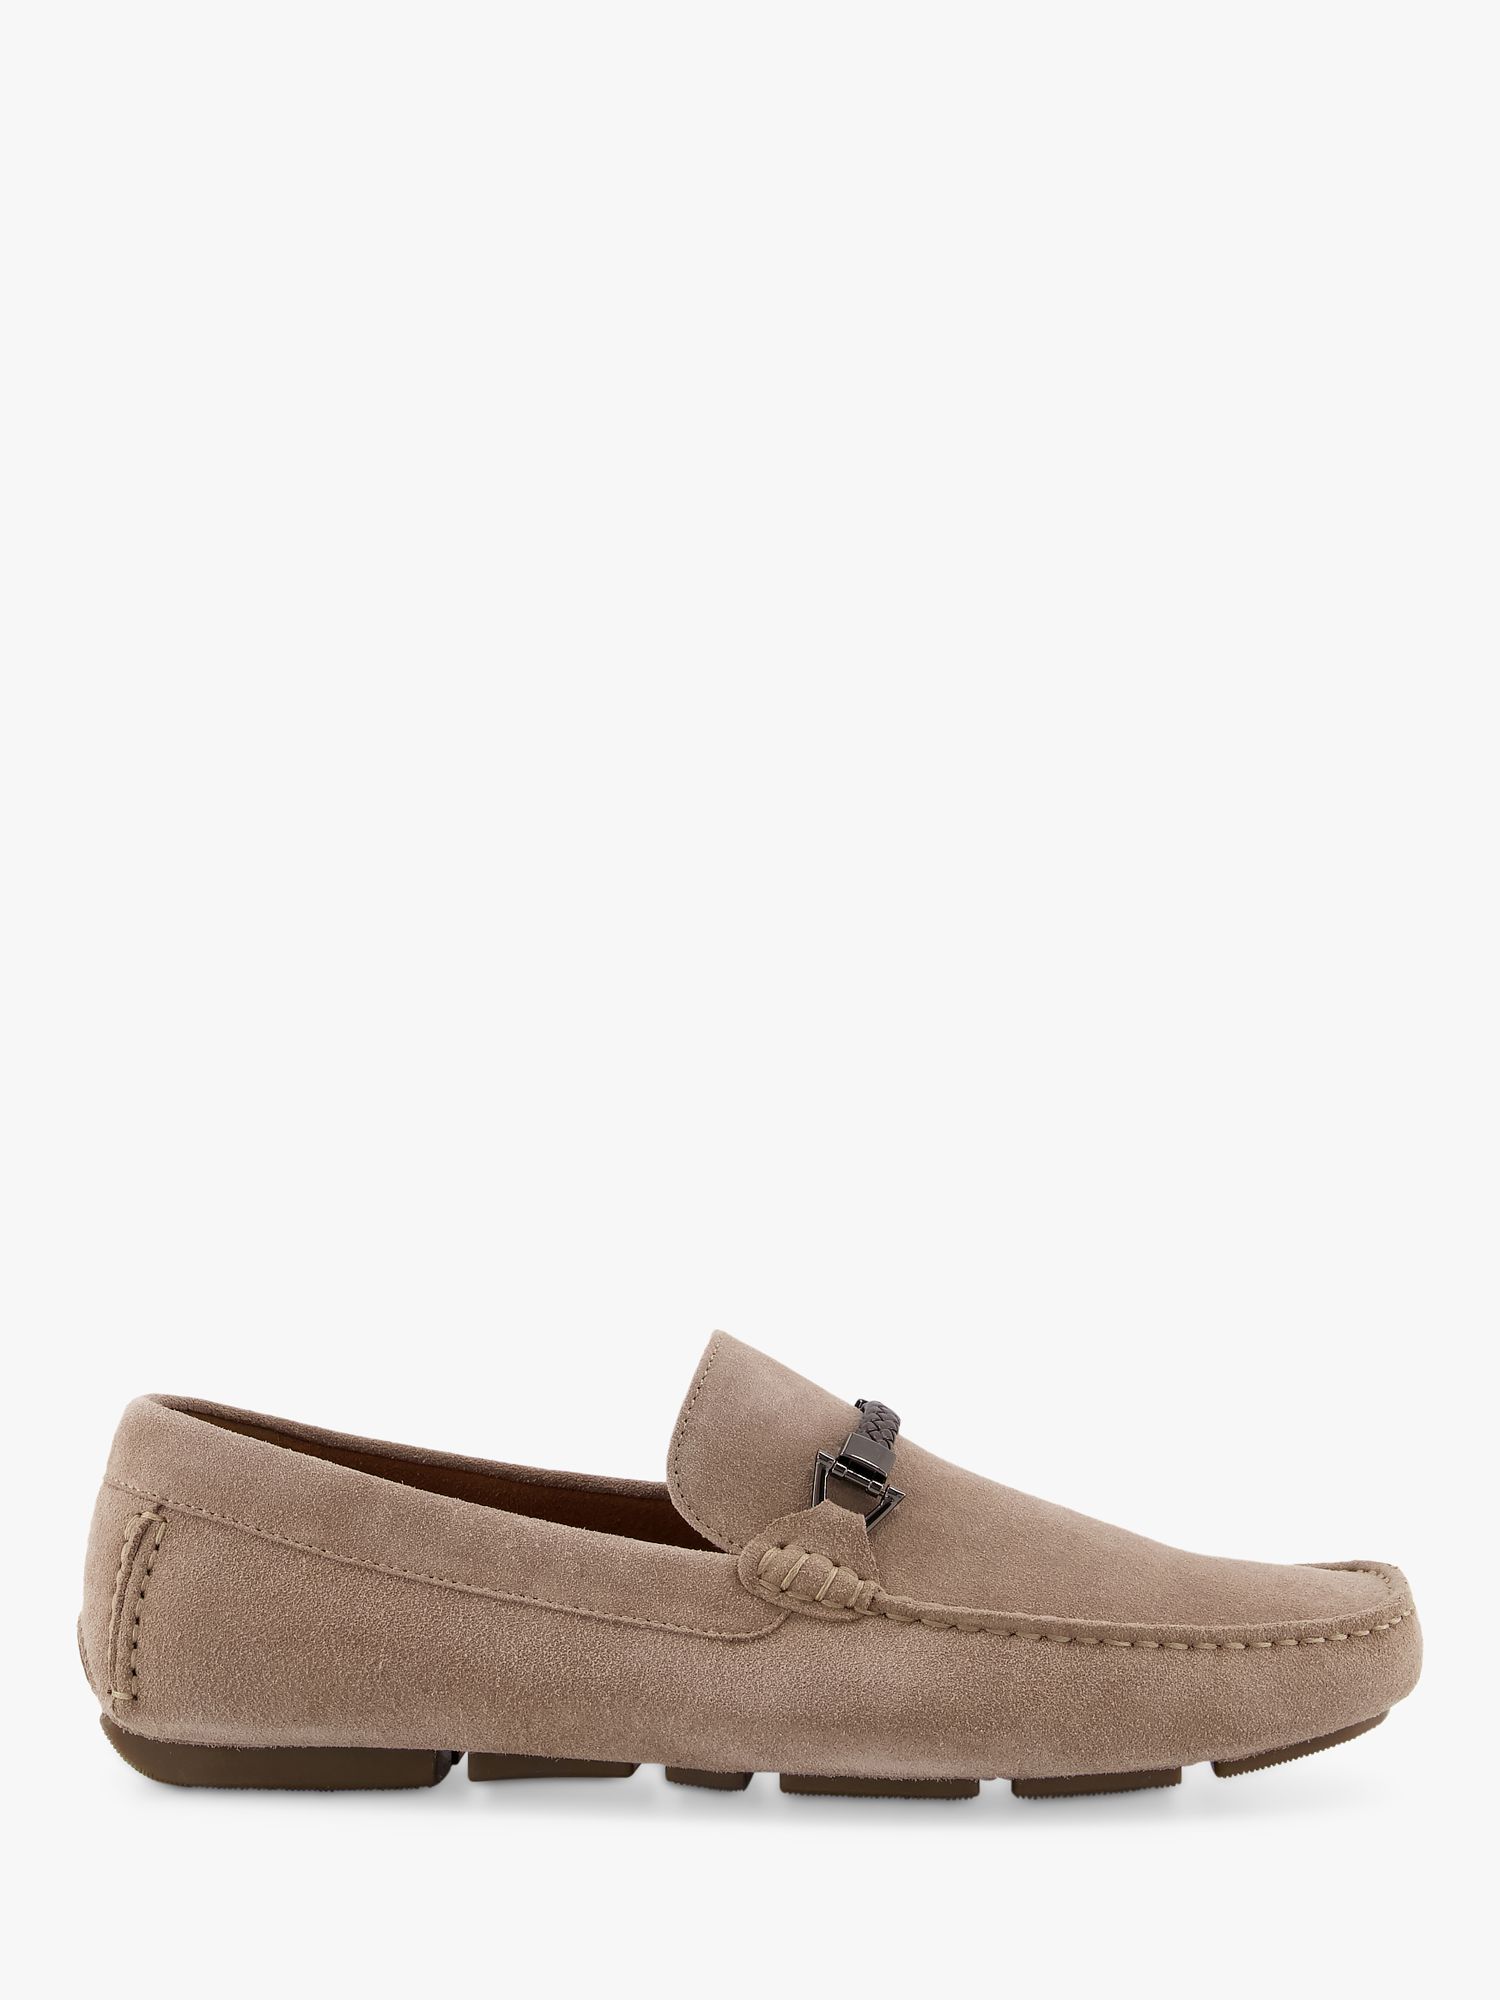 Dune Beacons Nubuck Loafers, Taupe at John Lewis & Partners